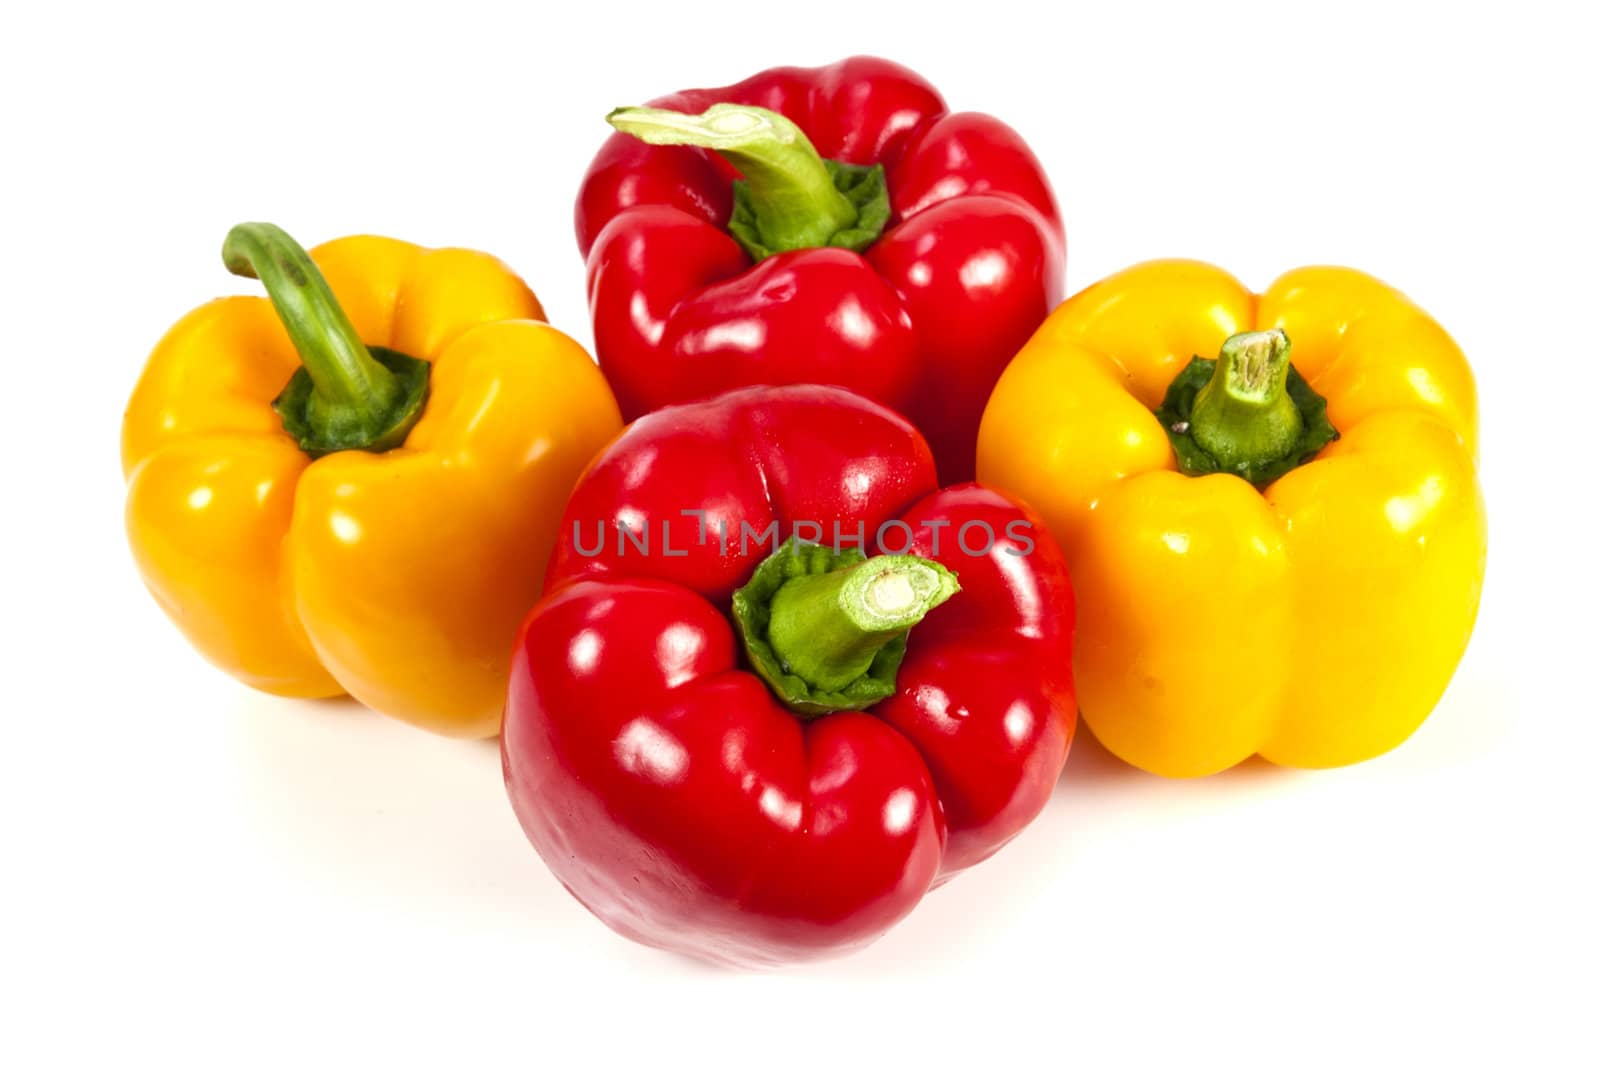 Yellow and red bell pepper on white background